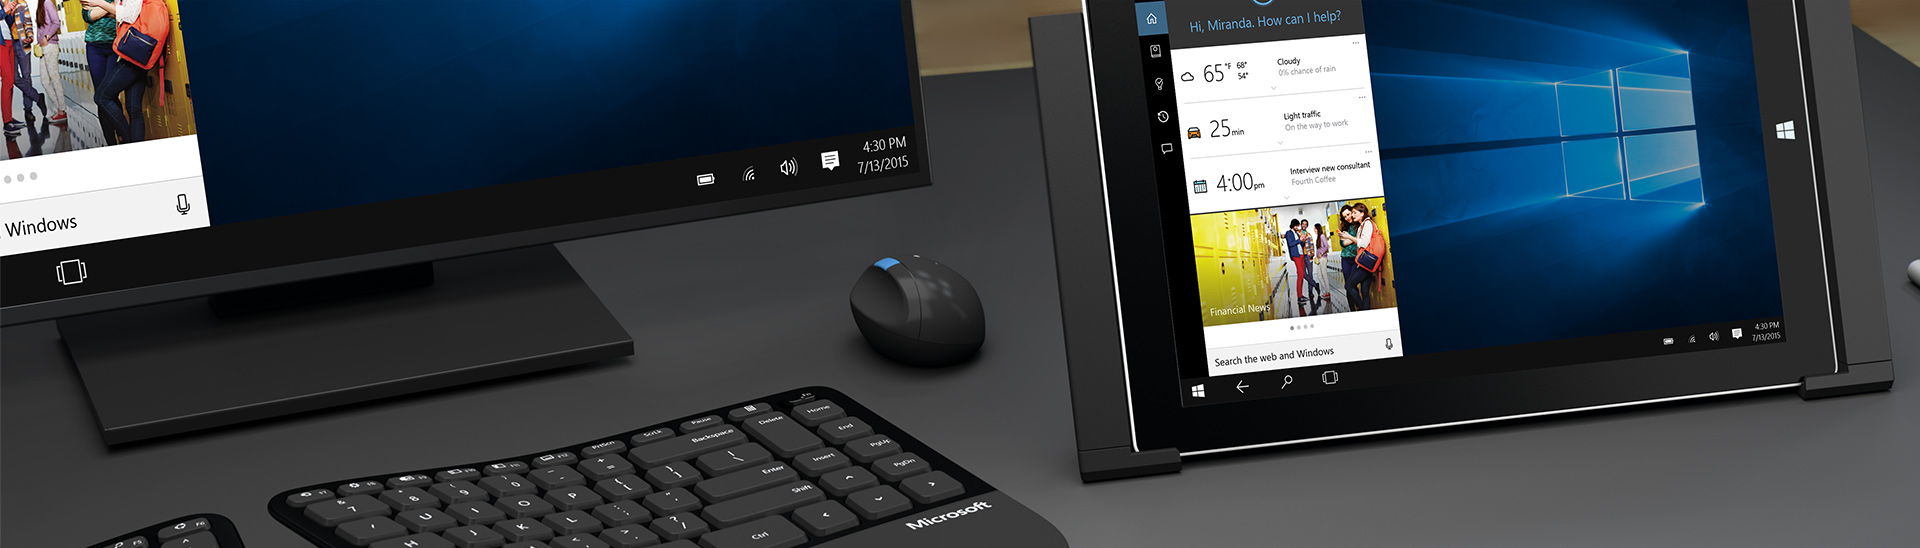 Promotional image of Microsoft desktop, keyboard, mouse, and tablet